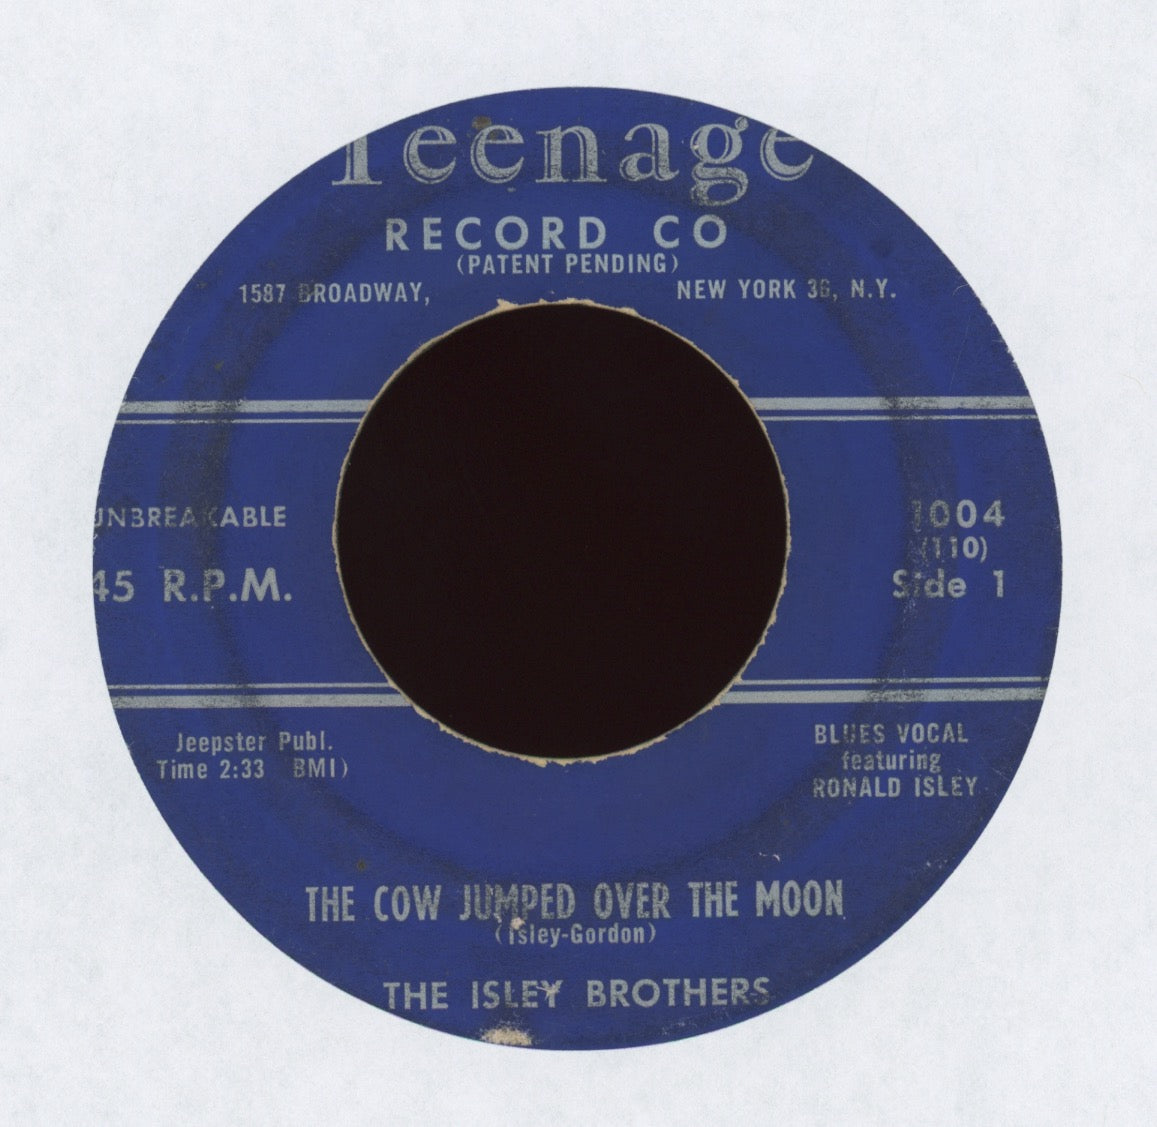 The Isley Brothers - The Cow Jumped Over The Moon on Teenage